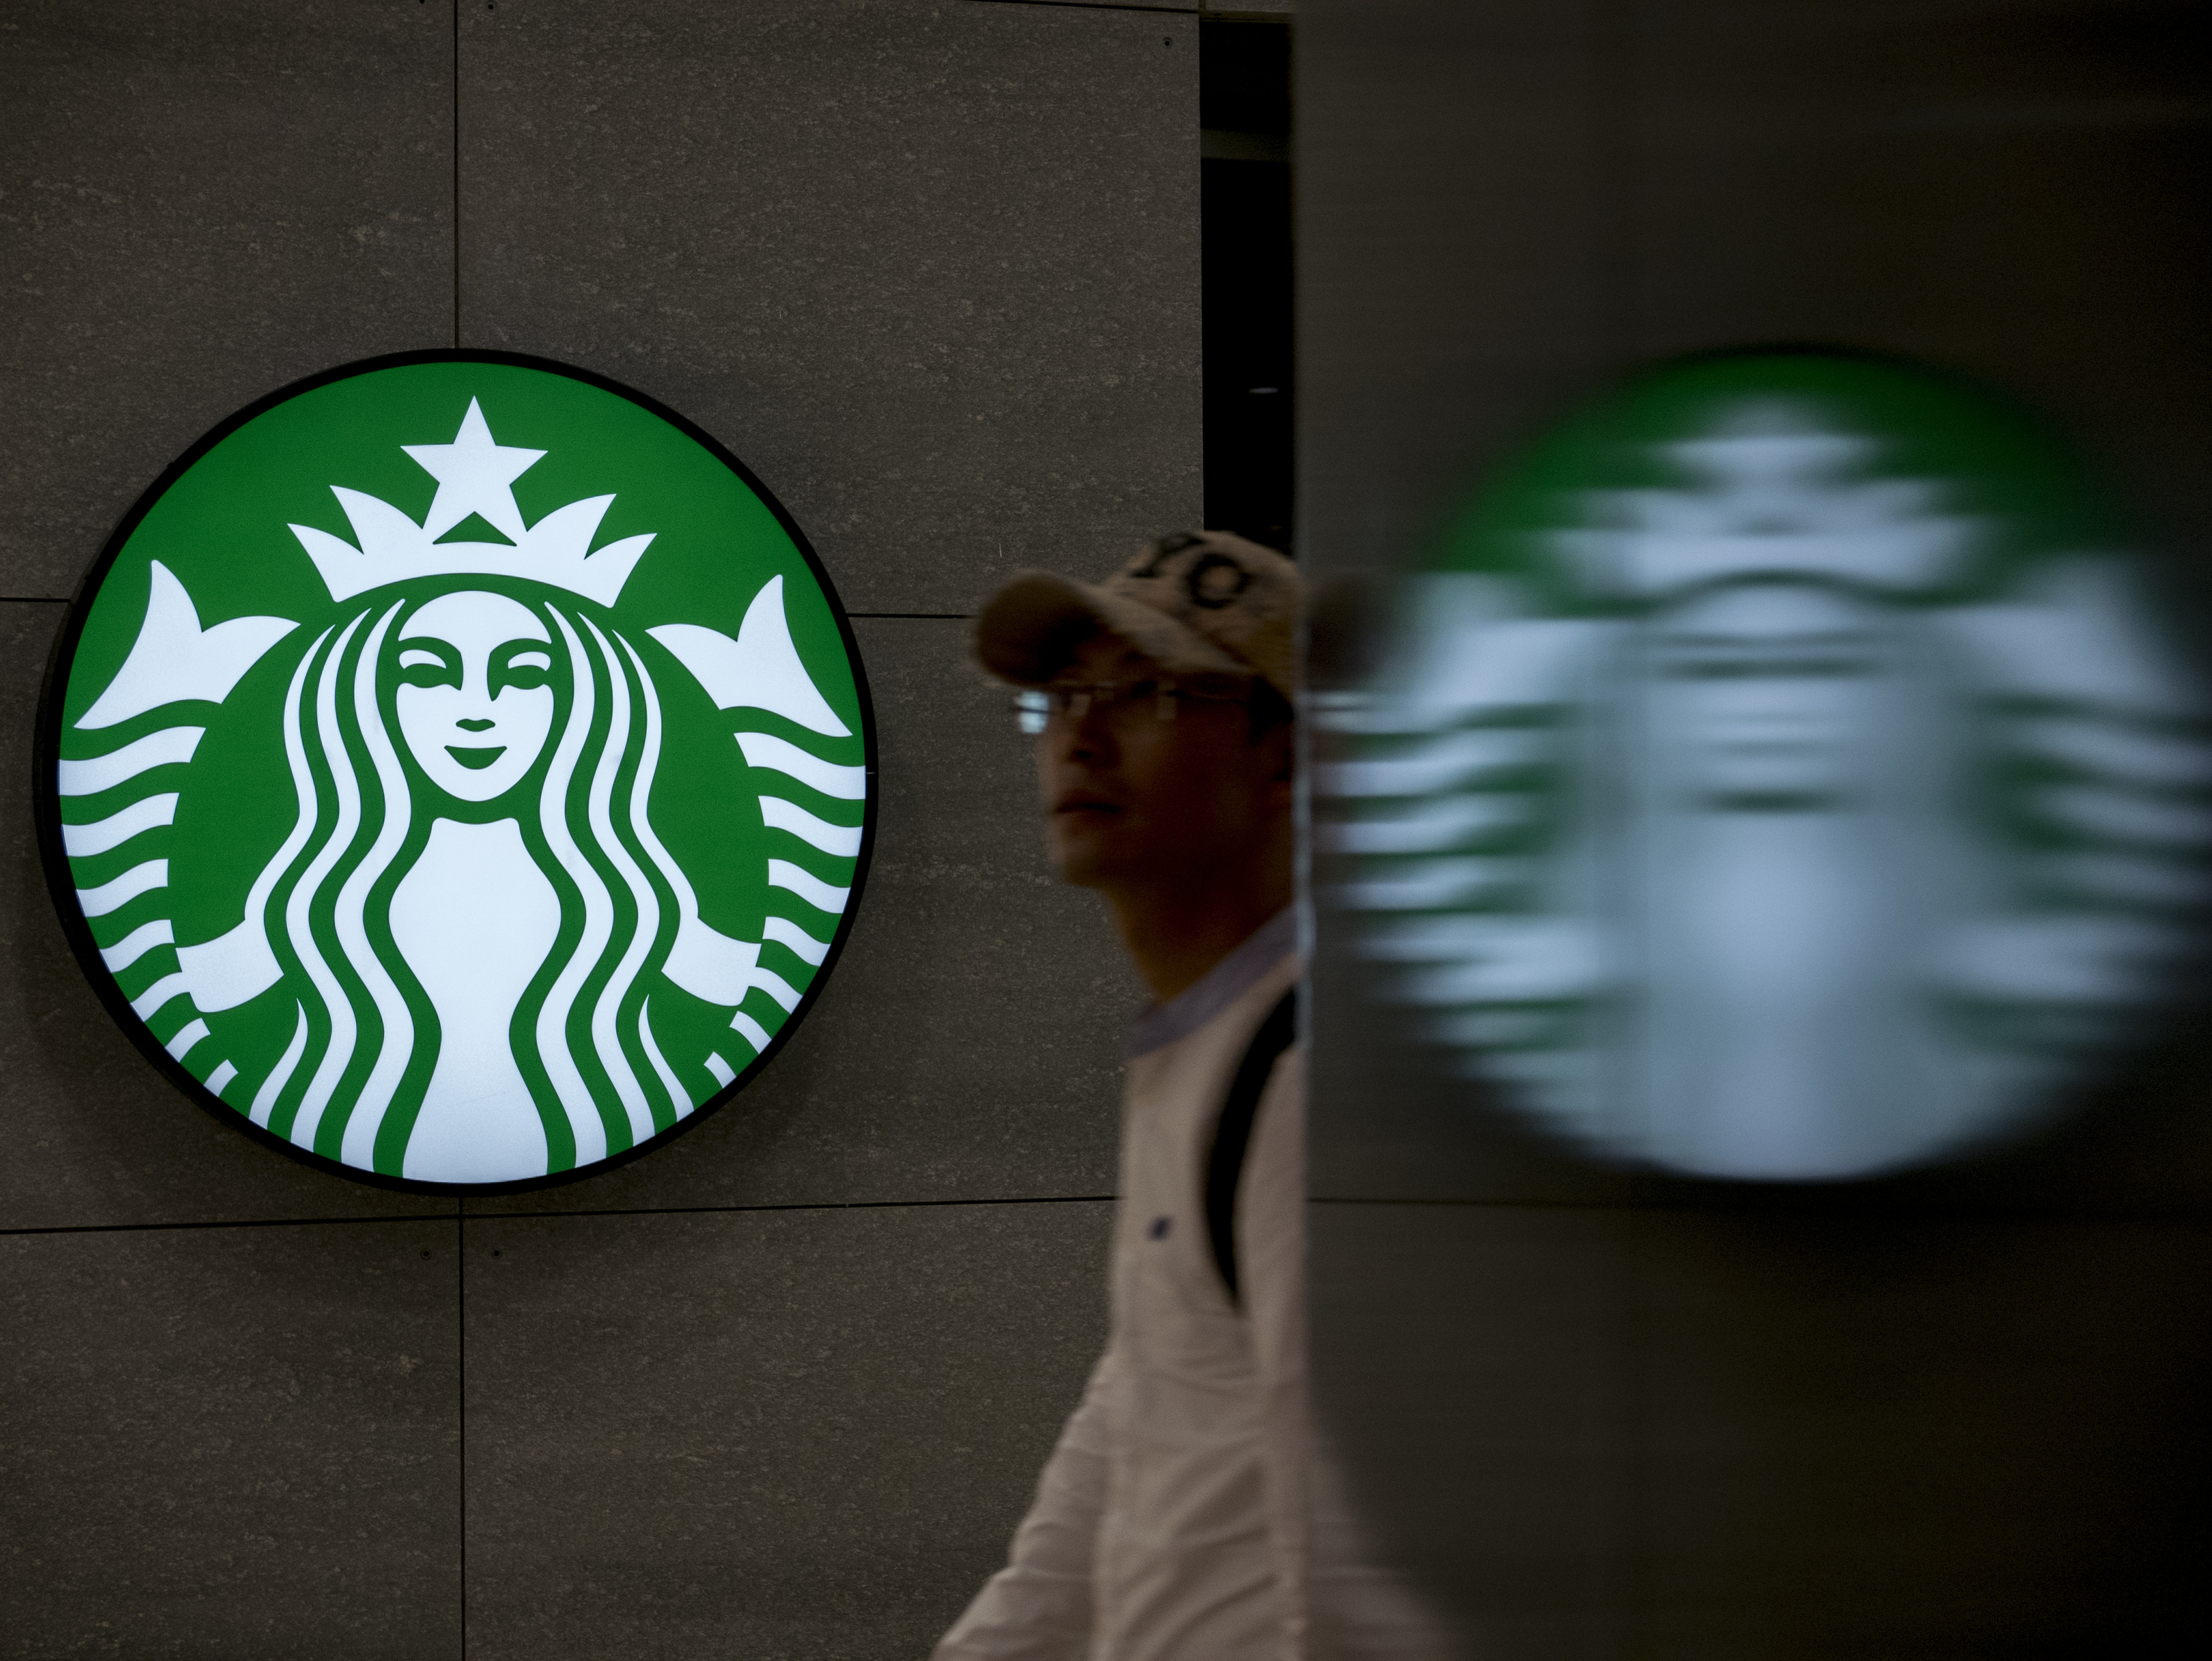 The logo of Starbucks is seen in this file photograph from 2015 in Yichang, a city in Hubei Province.